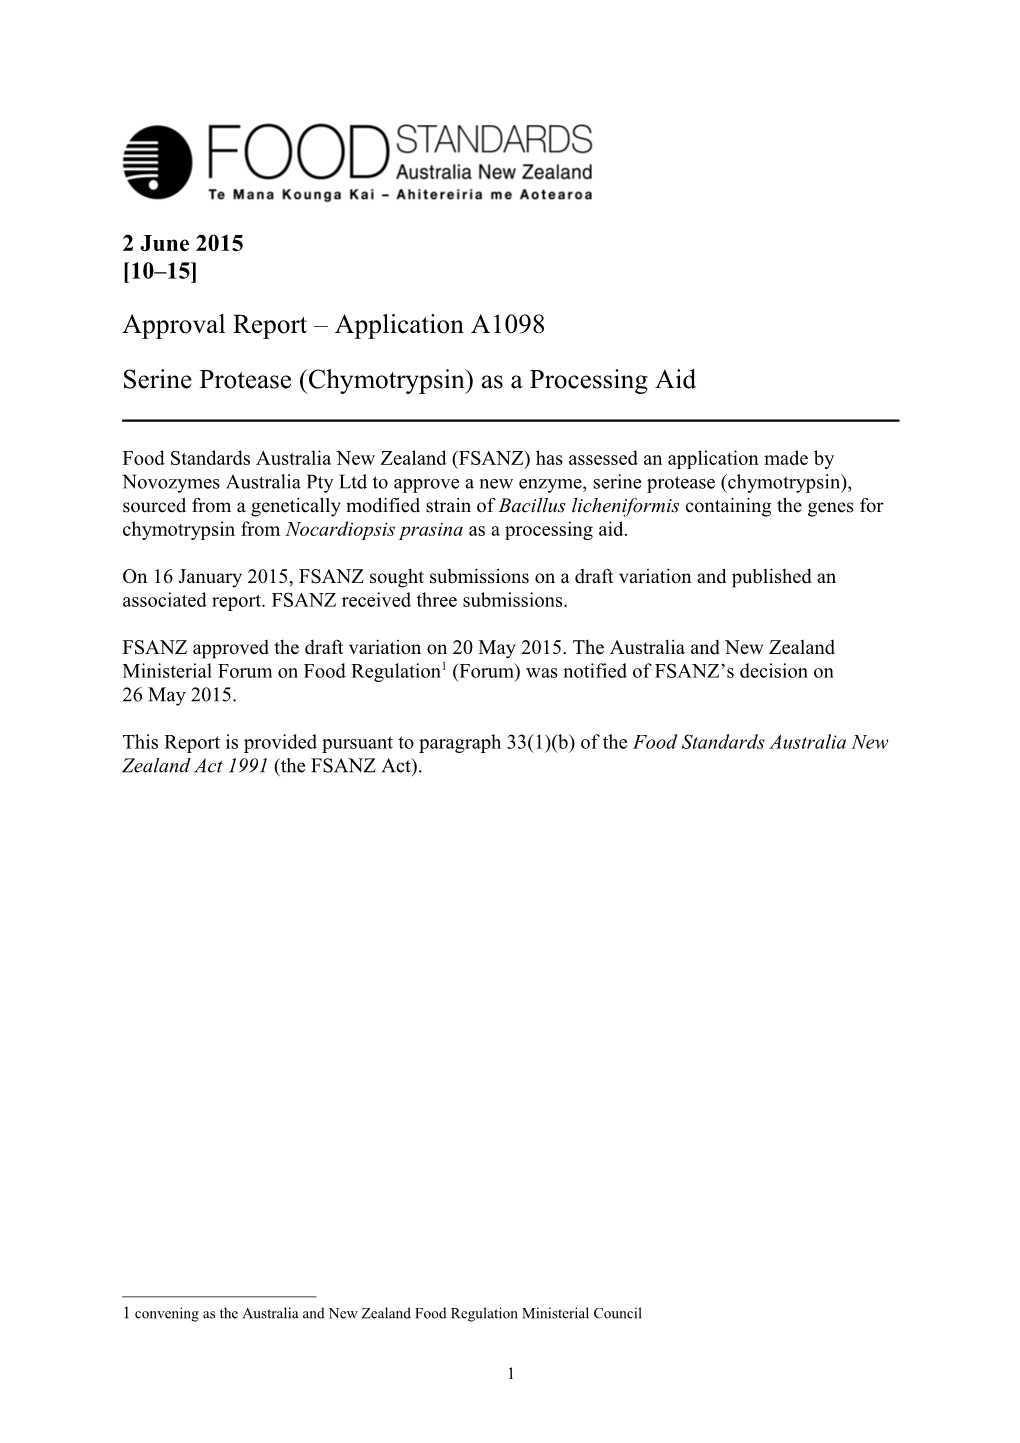 Serine Protease (Chymotrypsin) As a Processing Aid